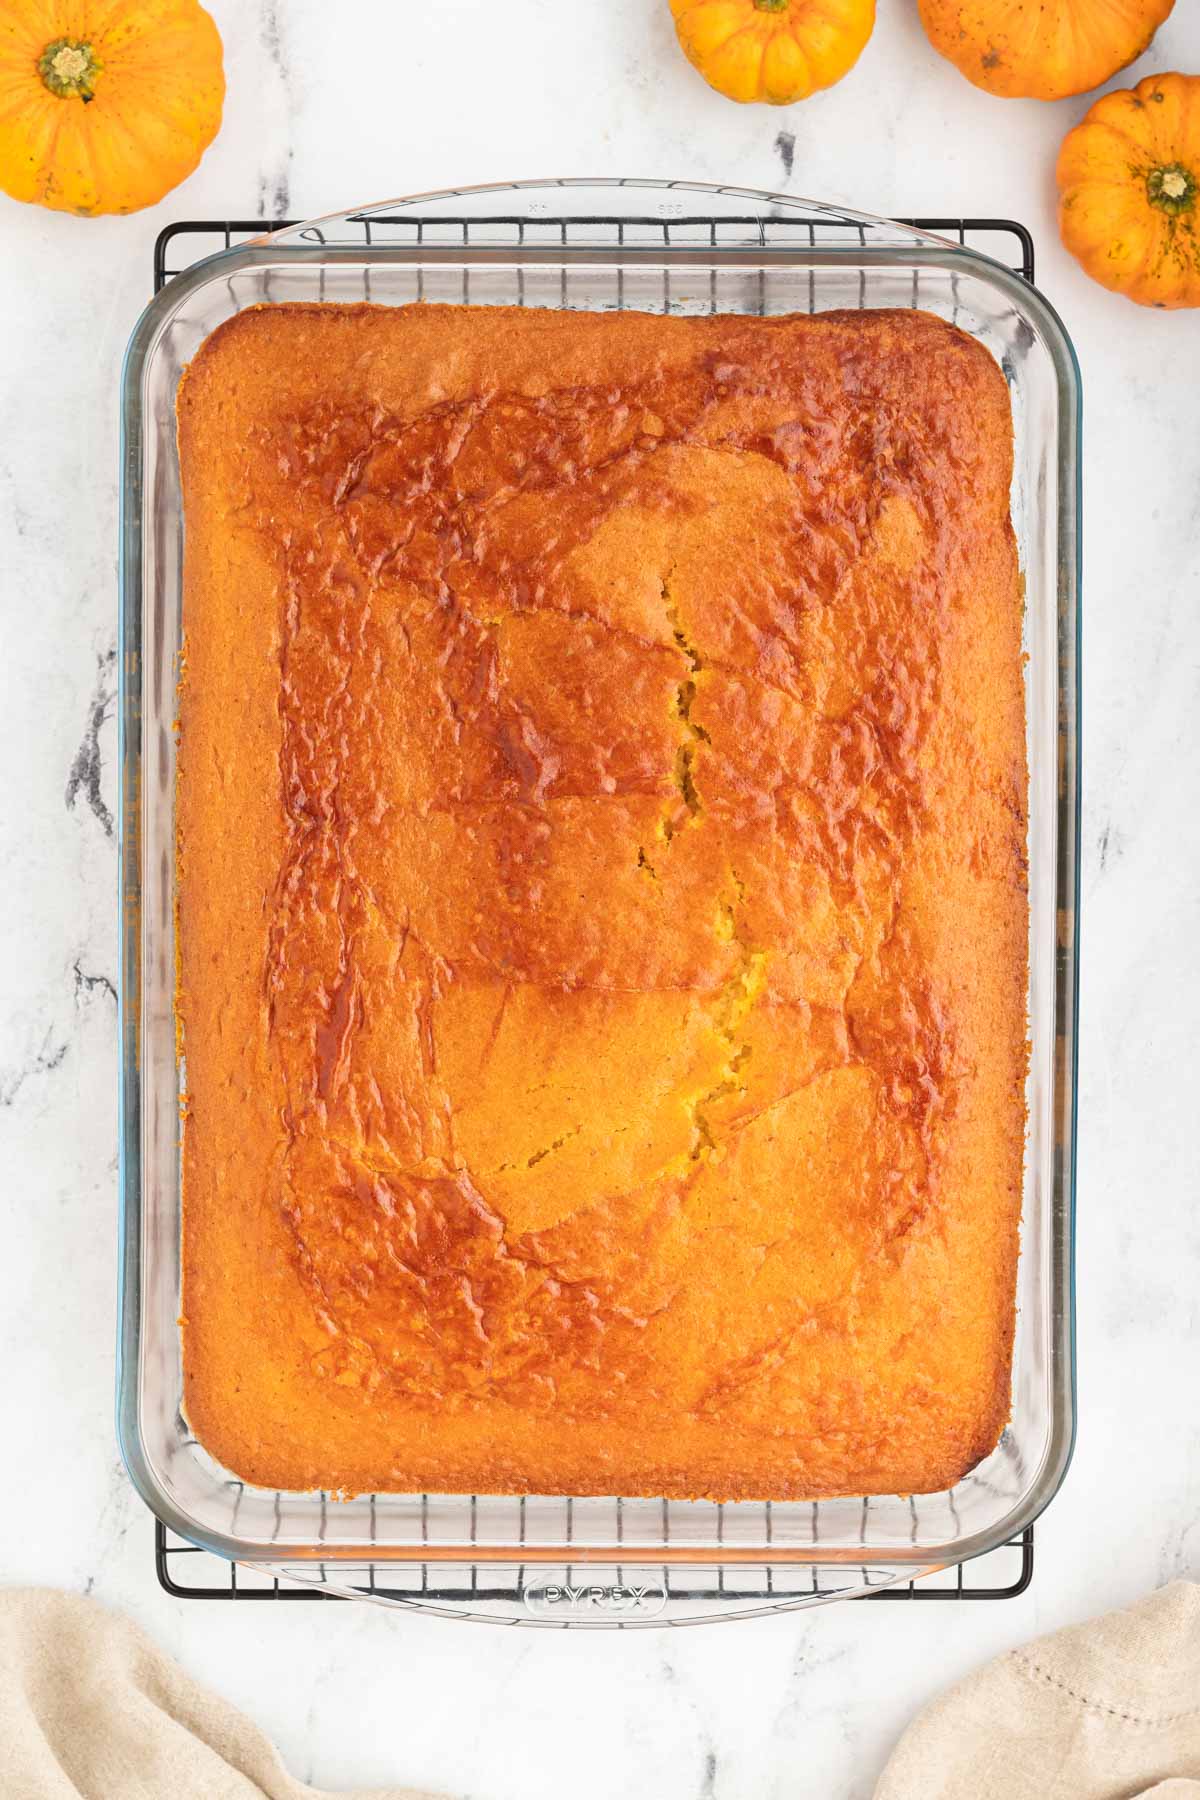 Pumpkin cake in a baking dish with pumpkins on the side on marble counter